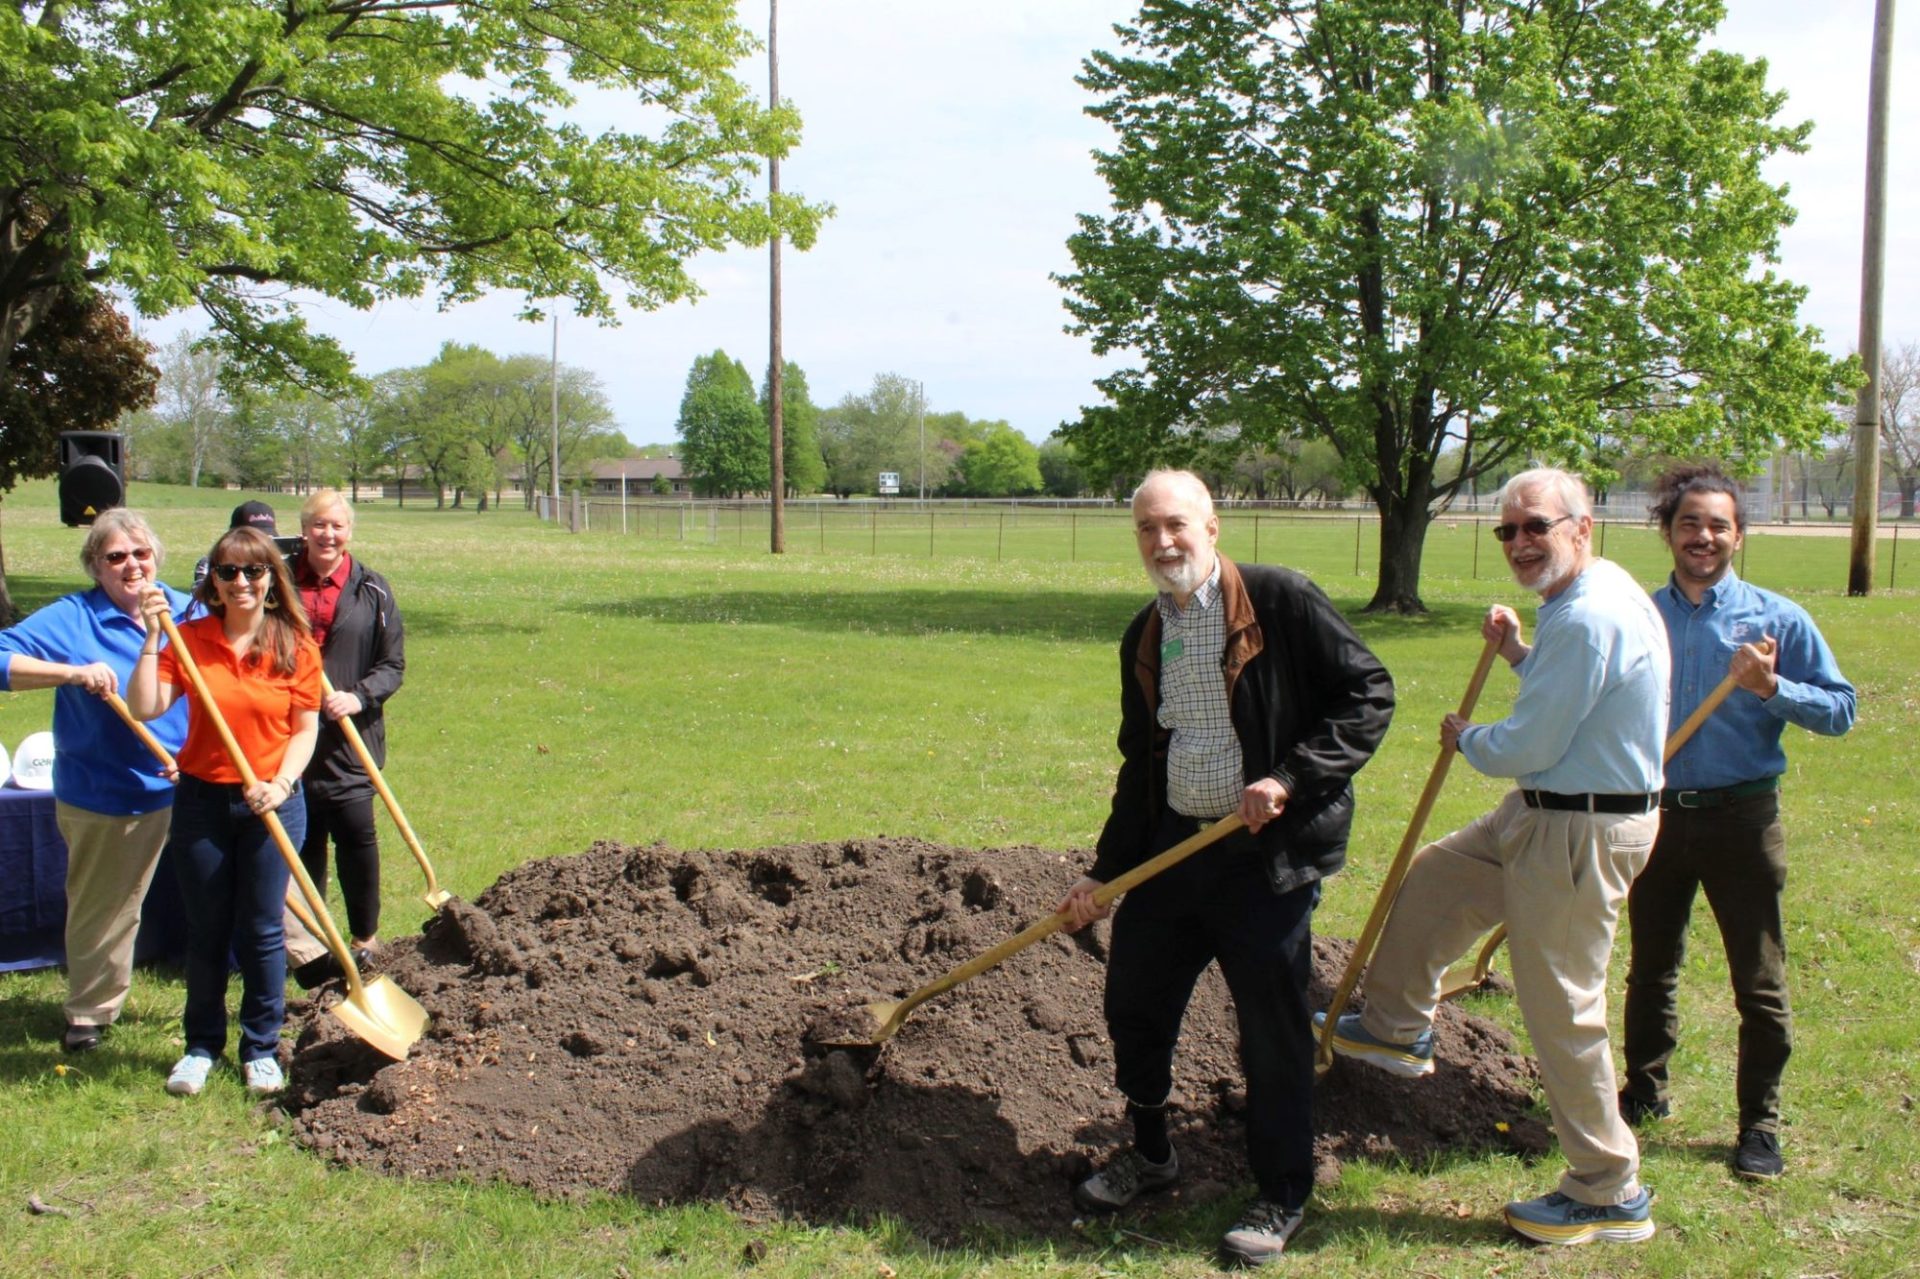 Six people are gathered around a pile of dirt, in the middle of a large grassy area. They are each holding a shovel.